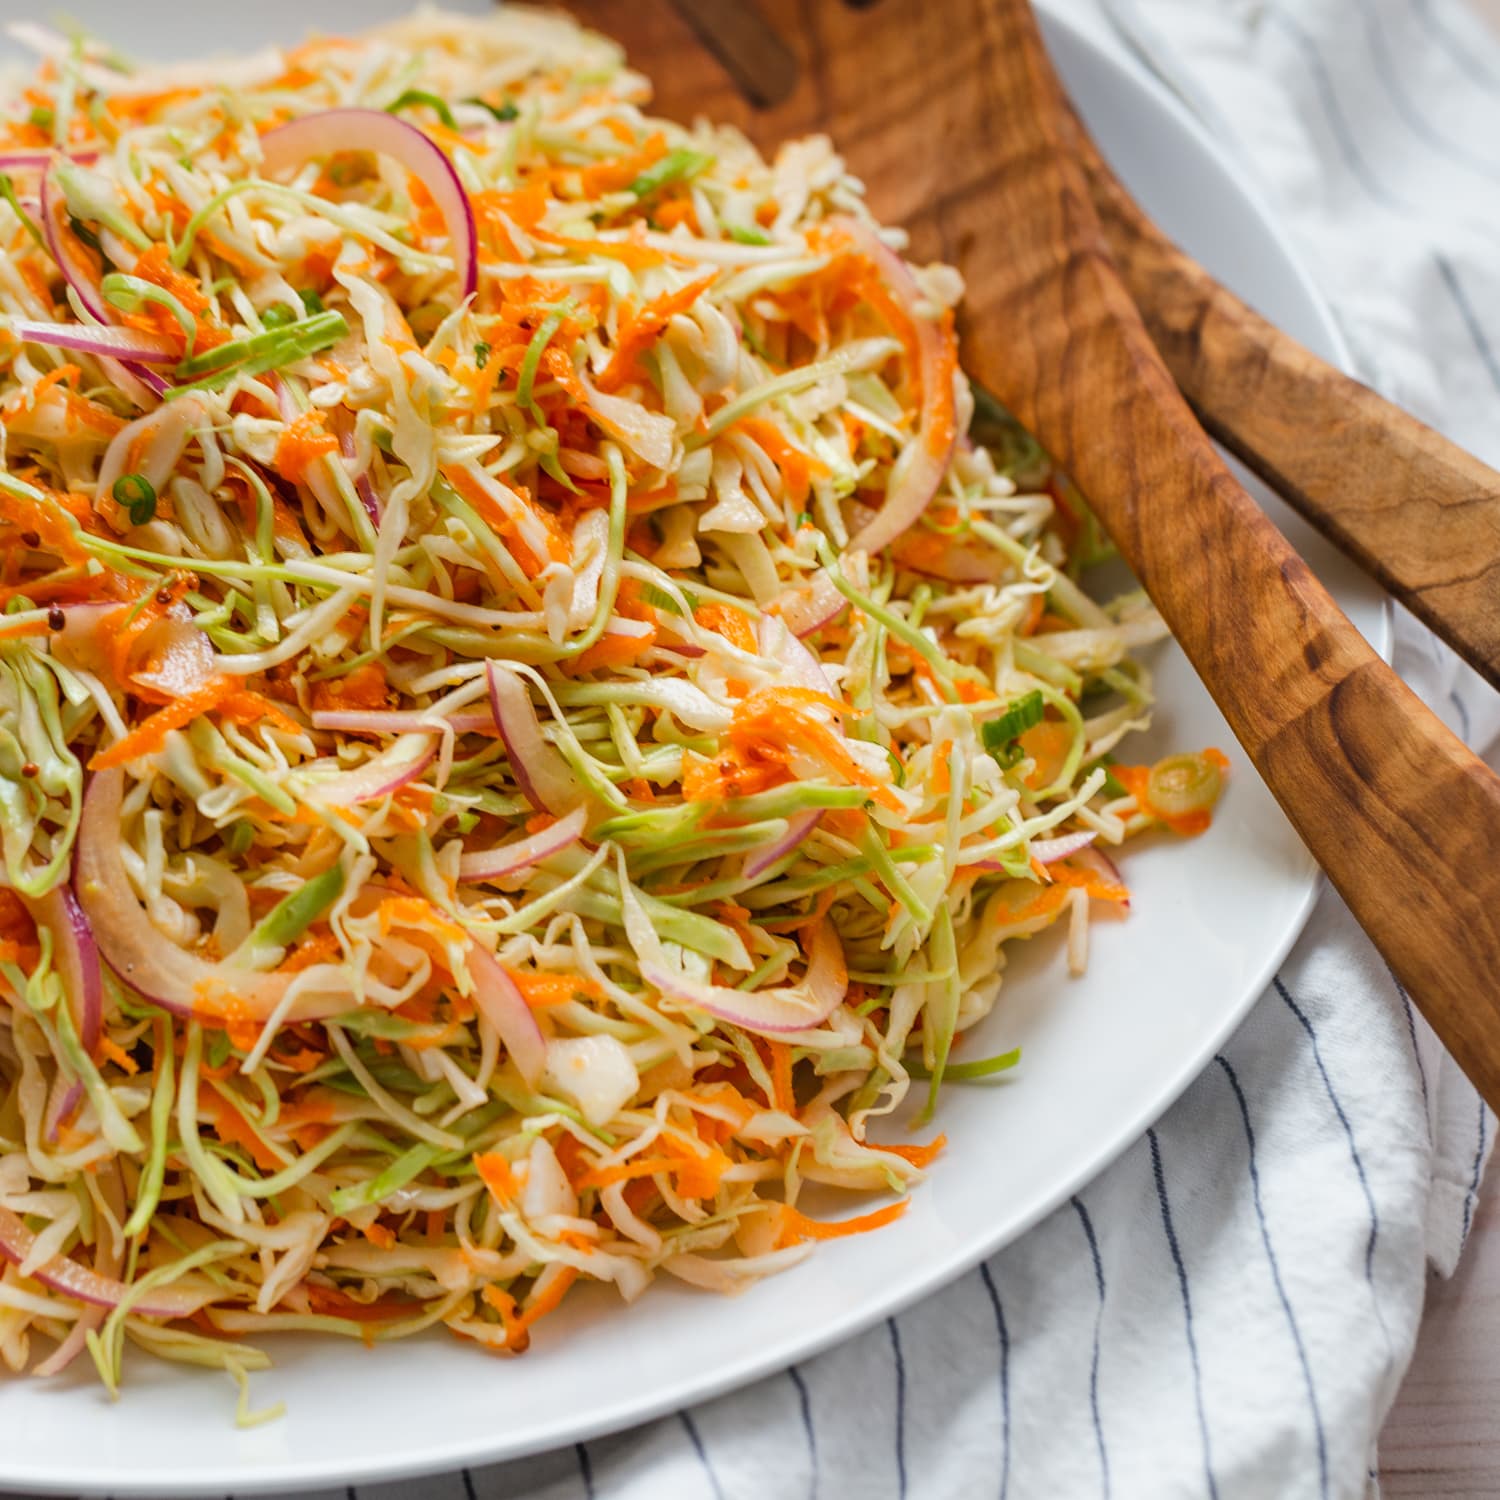 coleslaw dressing without mayo